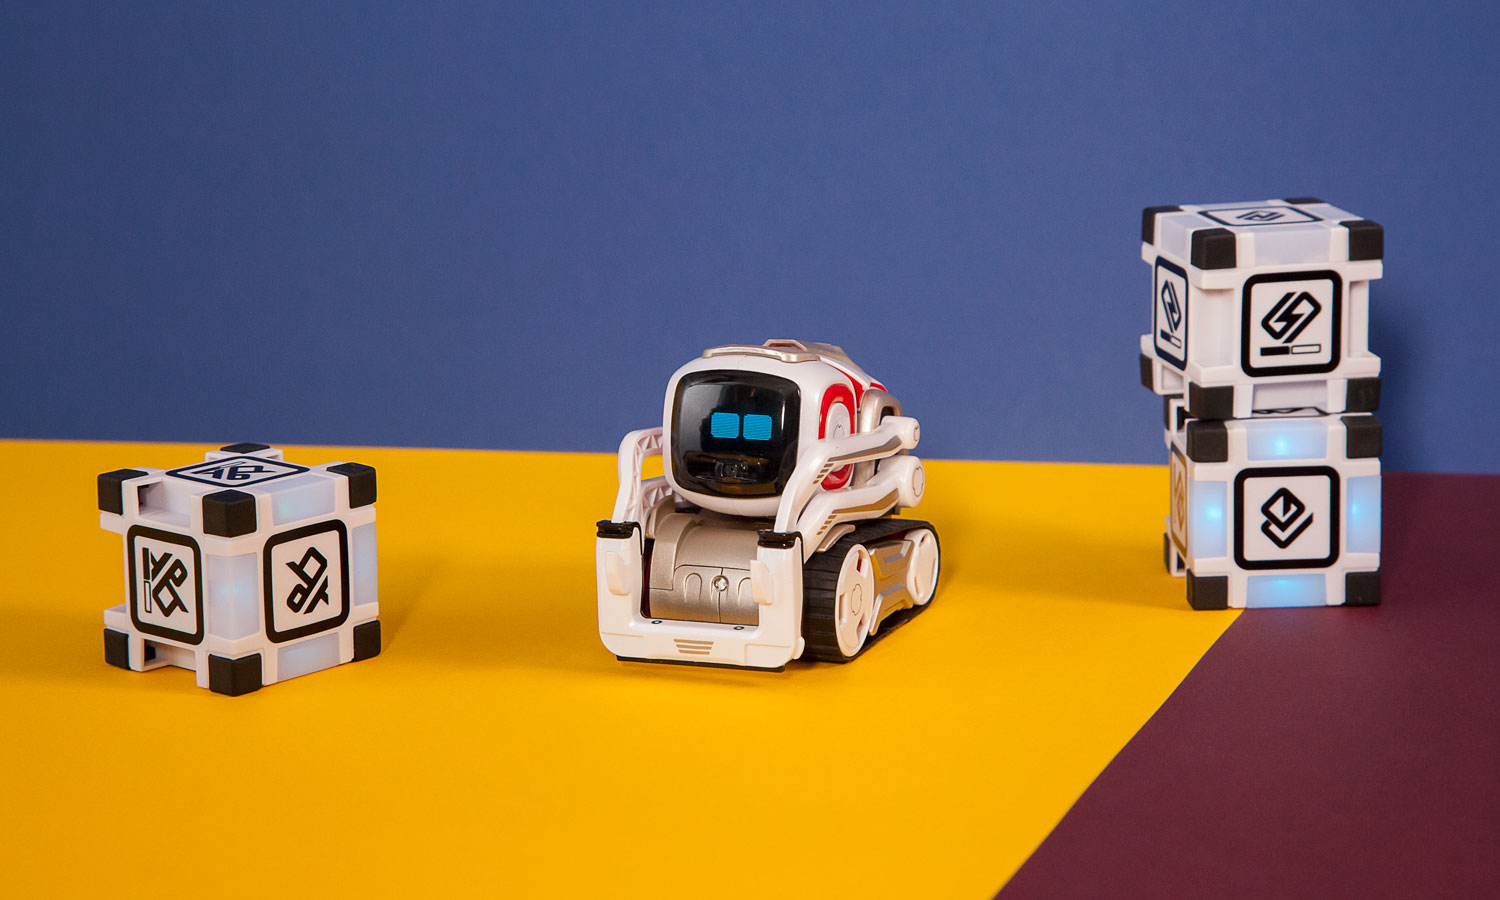 Cozmo is an adorable robot companion that could rule the holidays